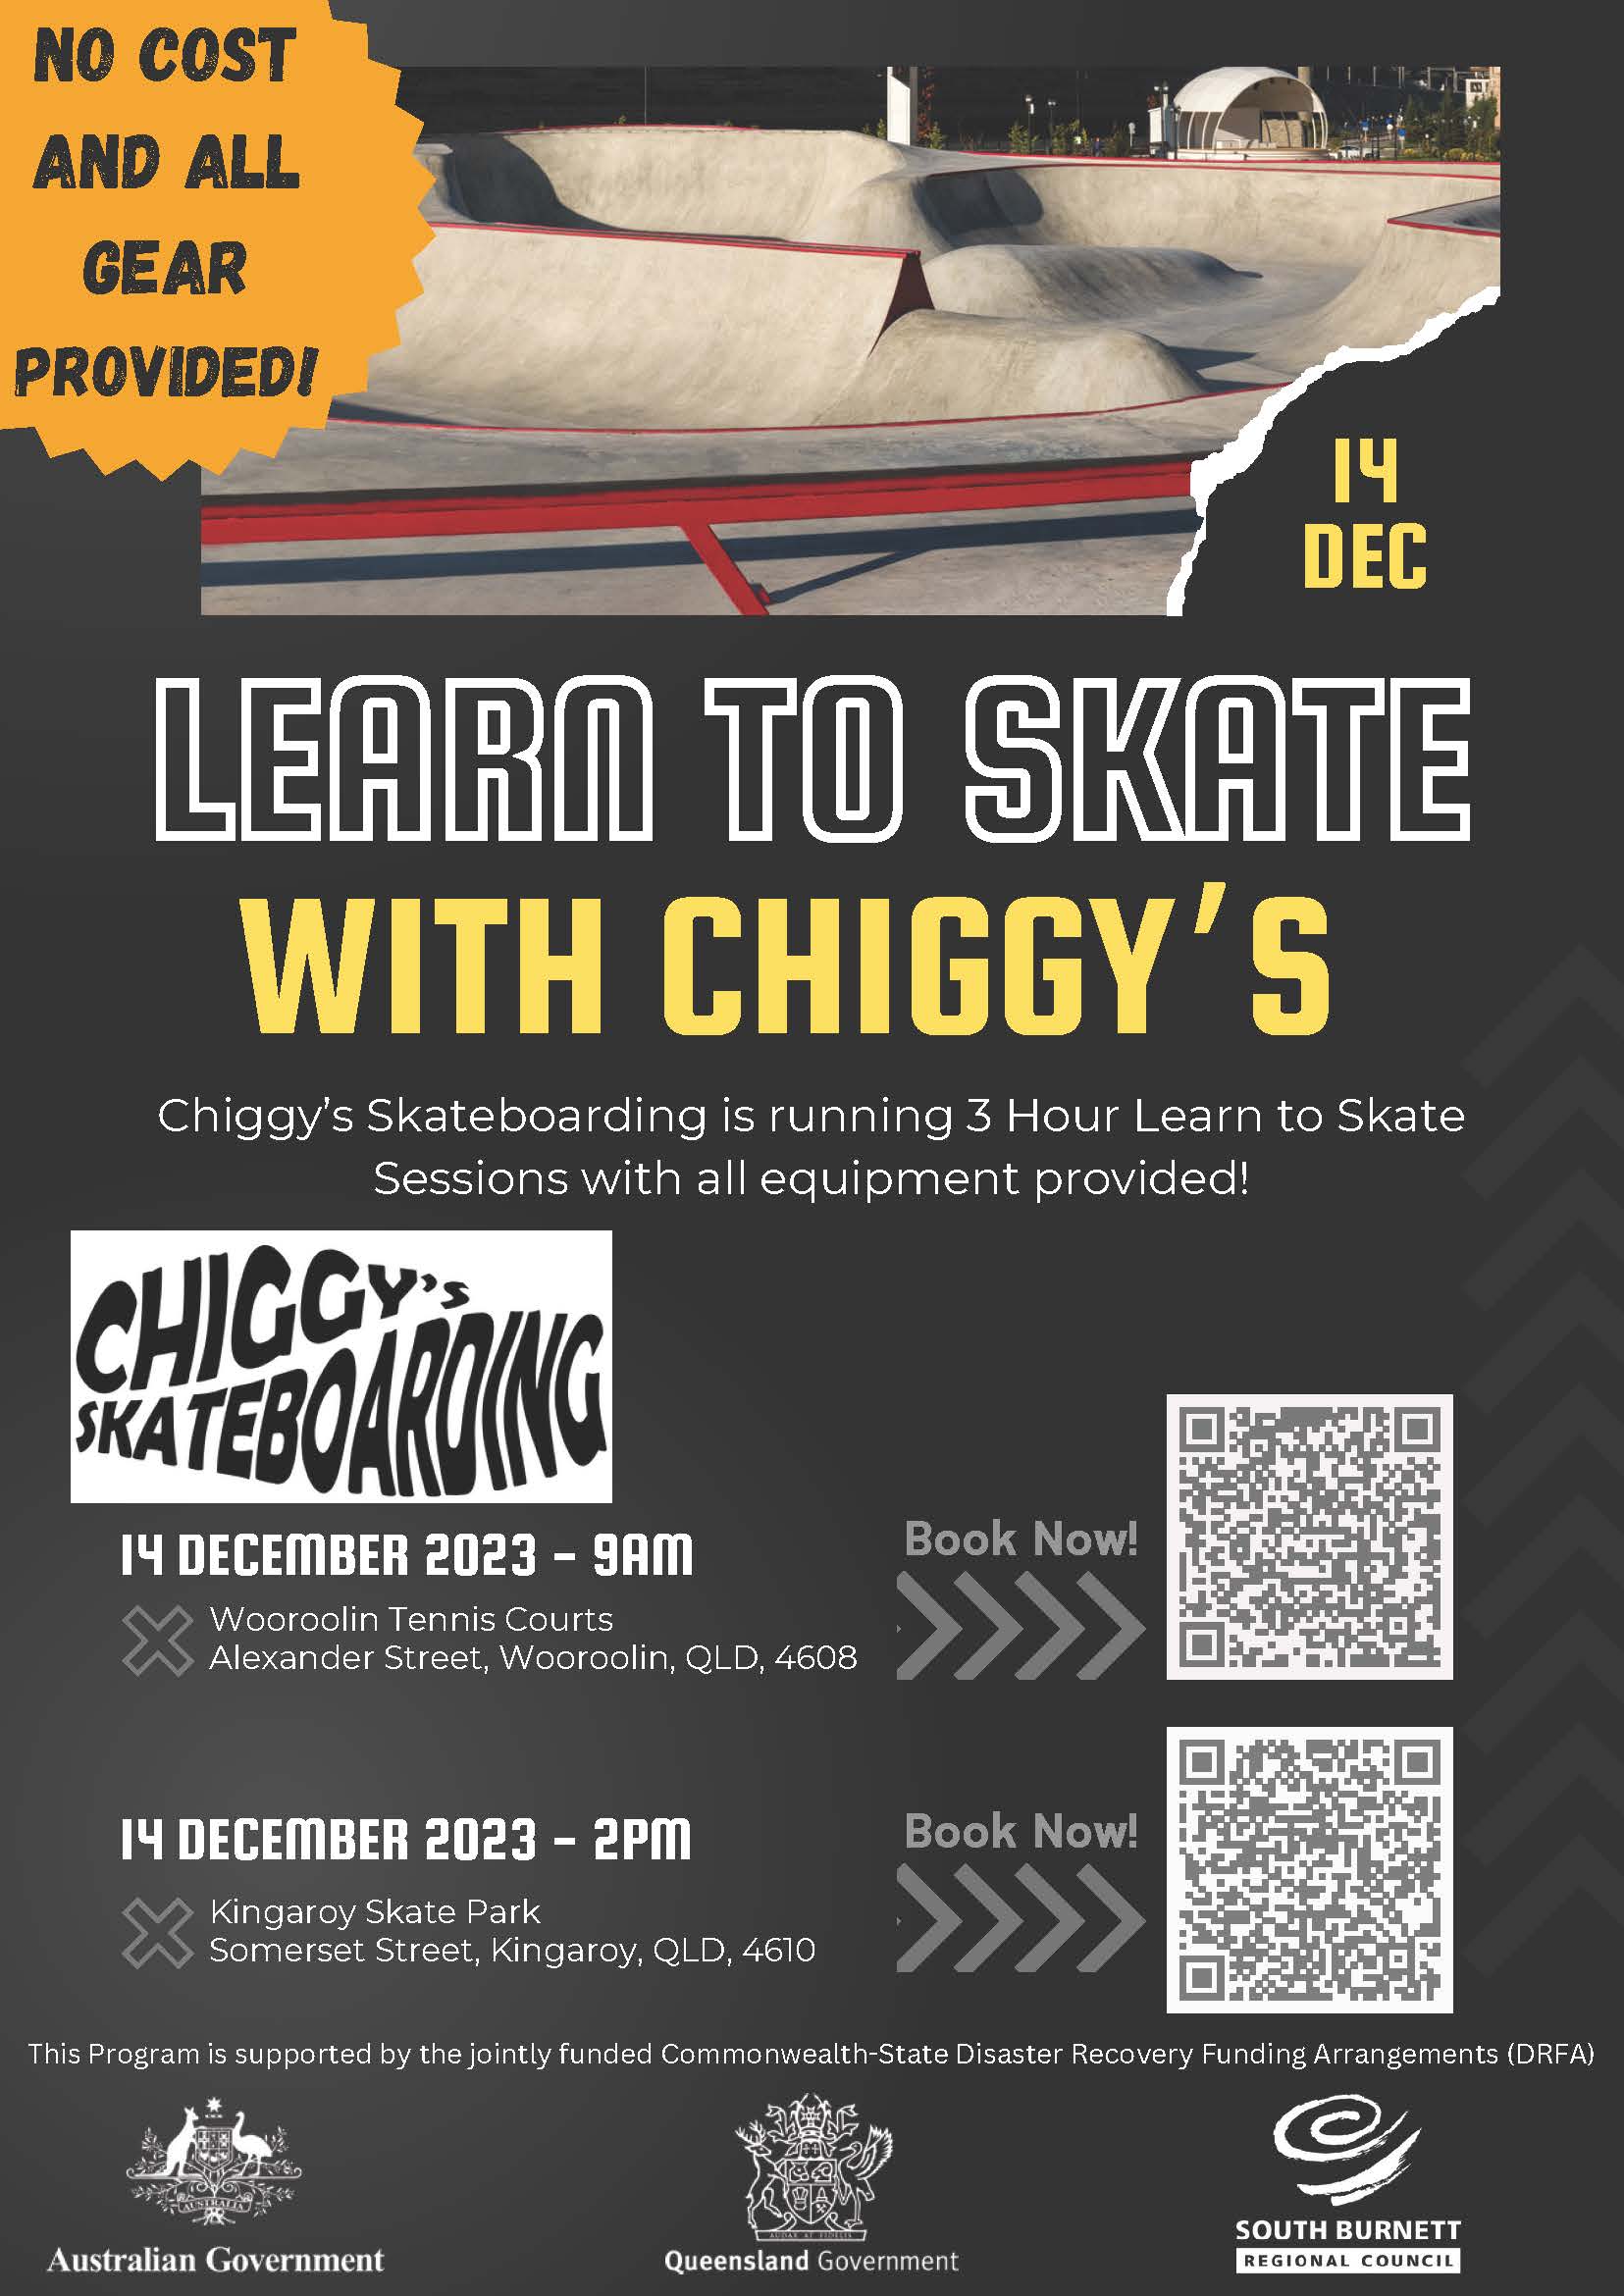 23 11 23 Skating with chiggy flyer 002